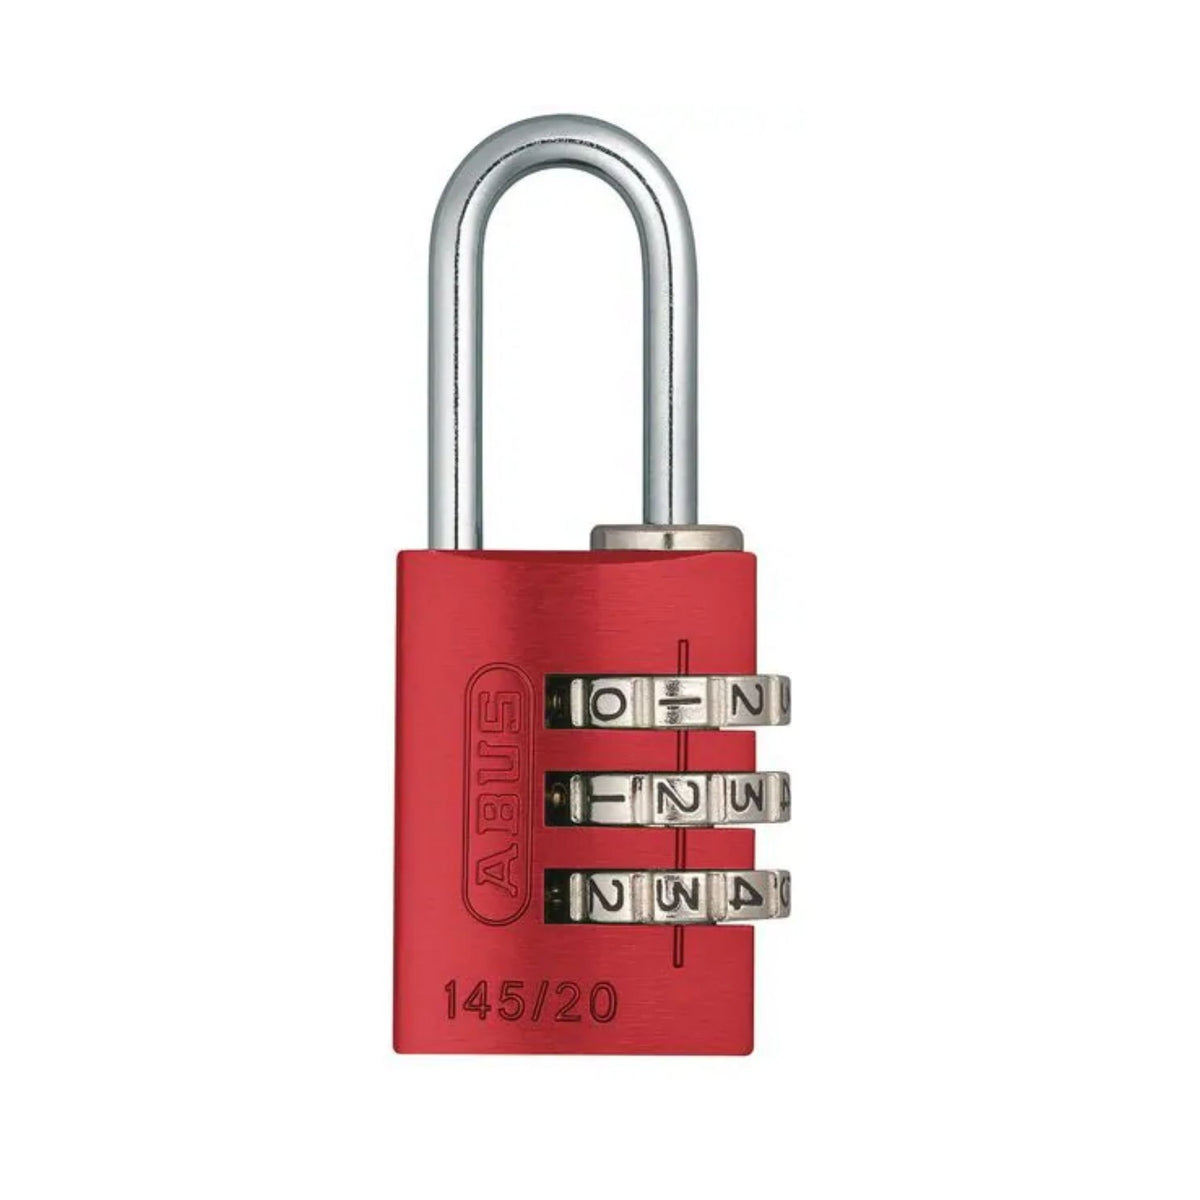 Abus 145/20 Red Combination Luggage Padlock - The Lock Source